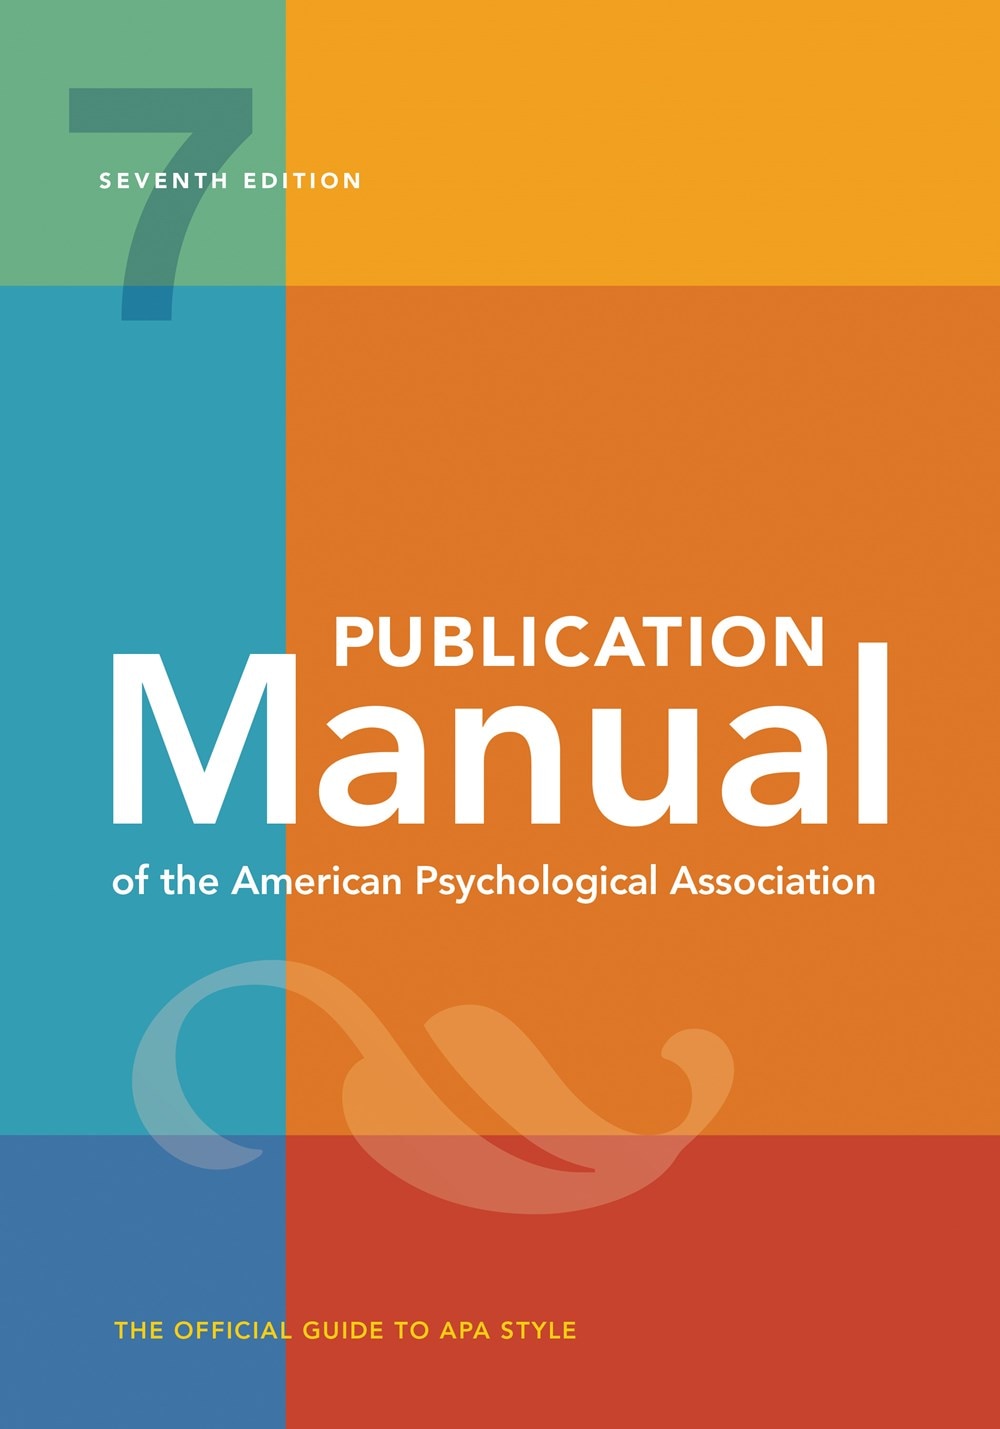 Publication Manual of the American Psychological Association: 7th Edition  Official  2020 Copyright